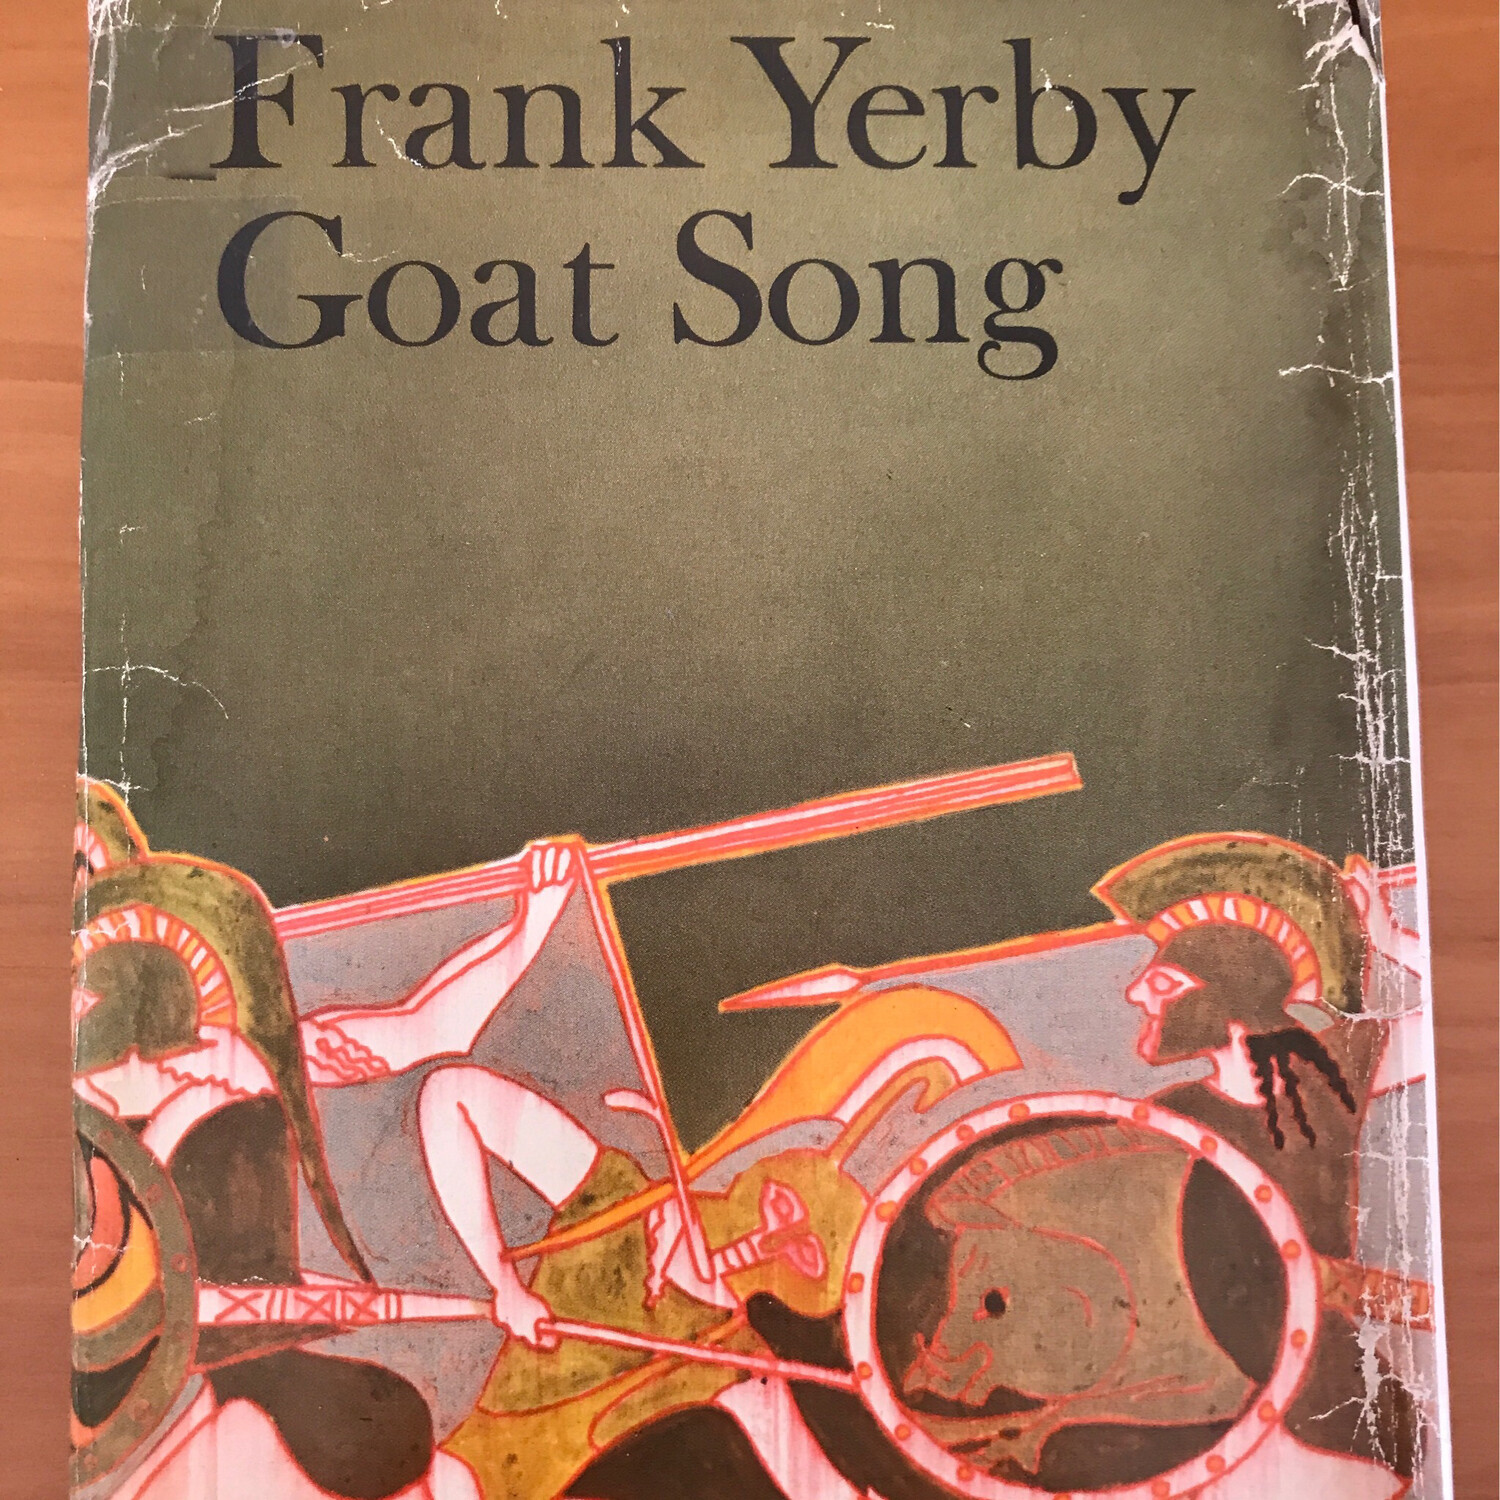 Goat Song, Frank Yerby